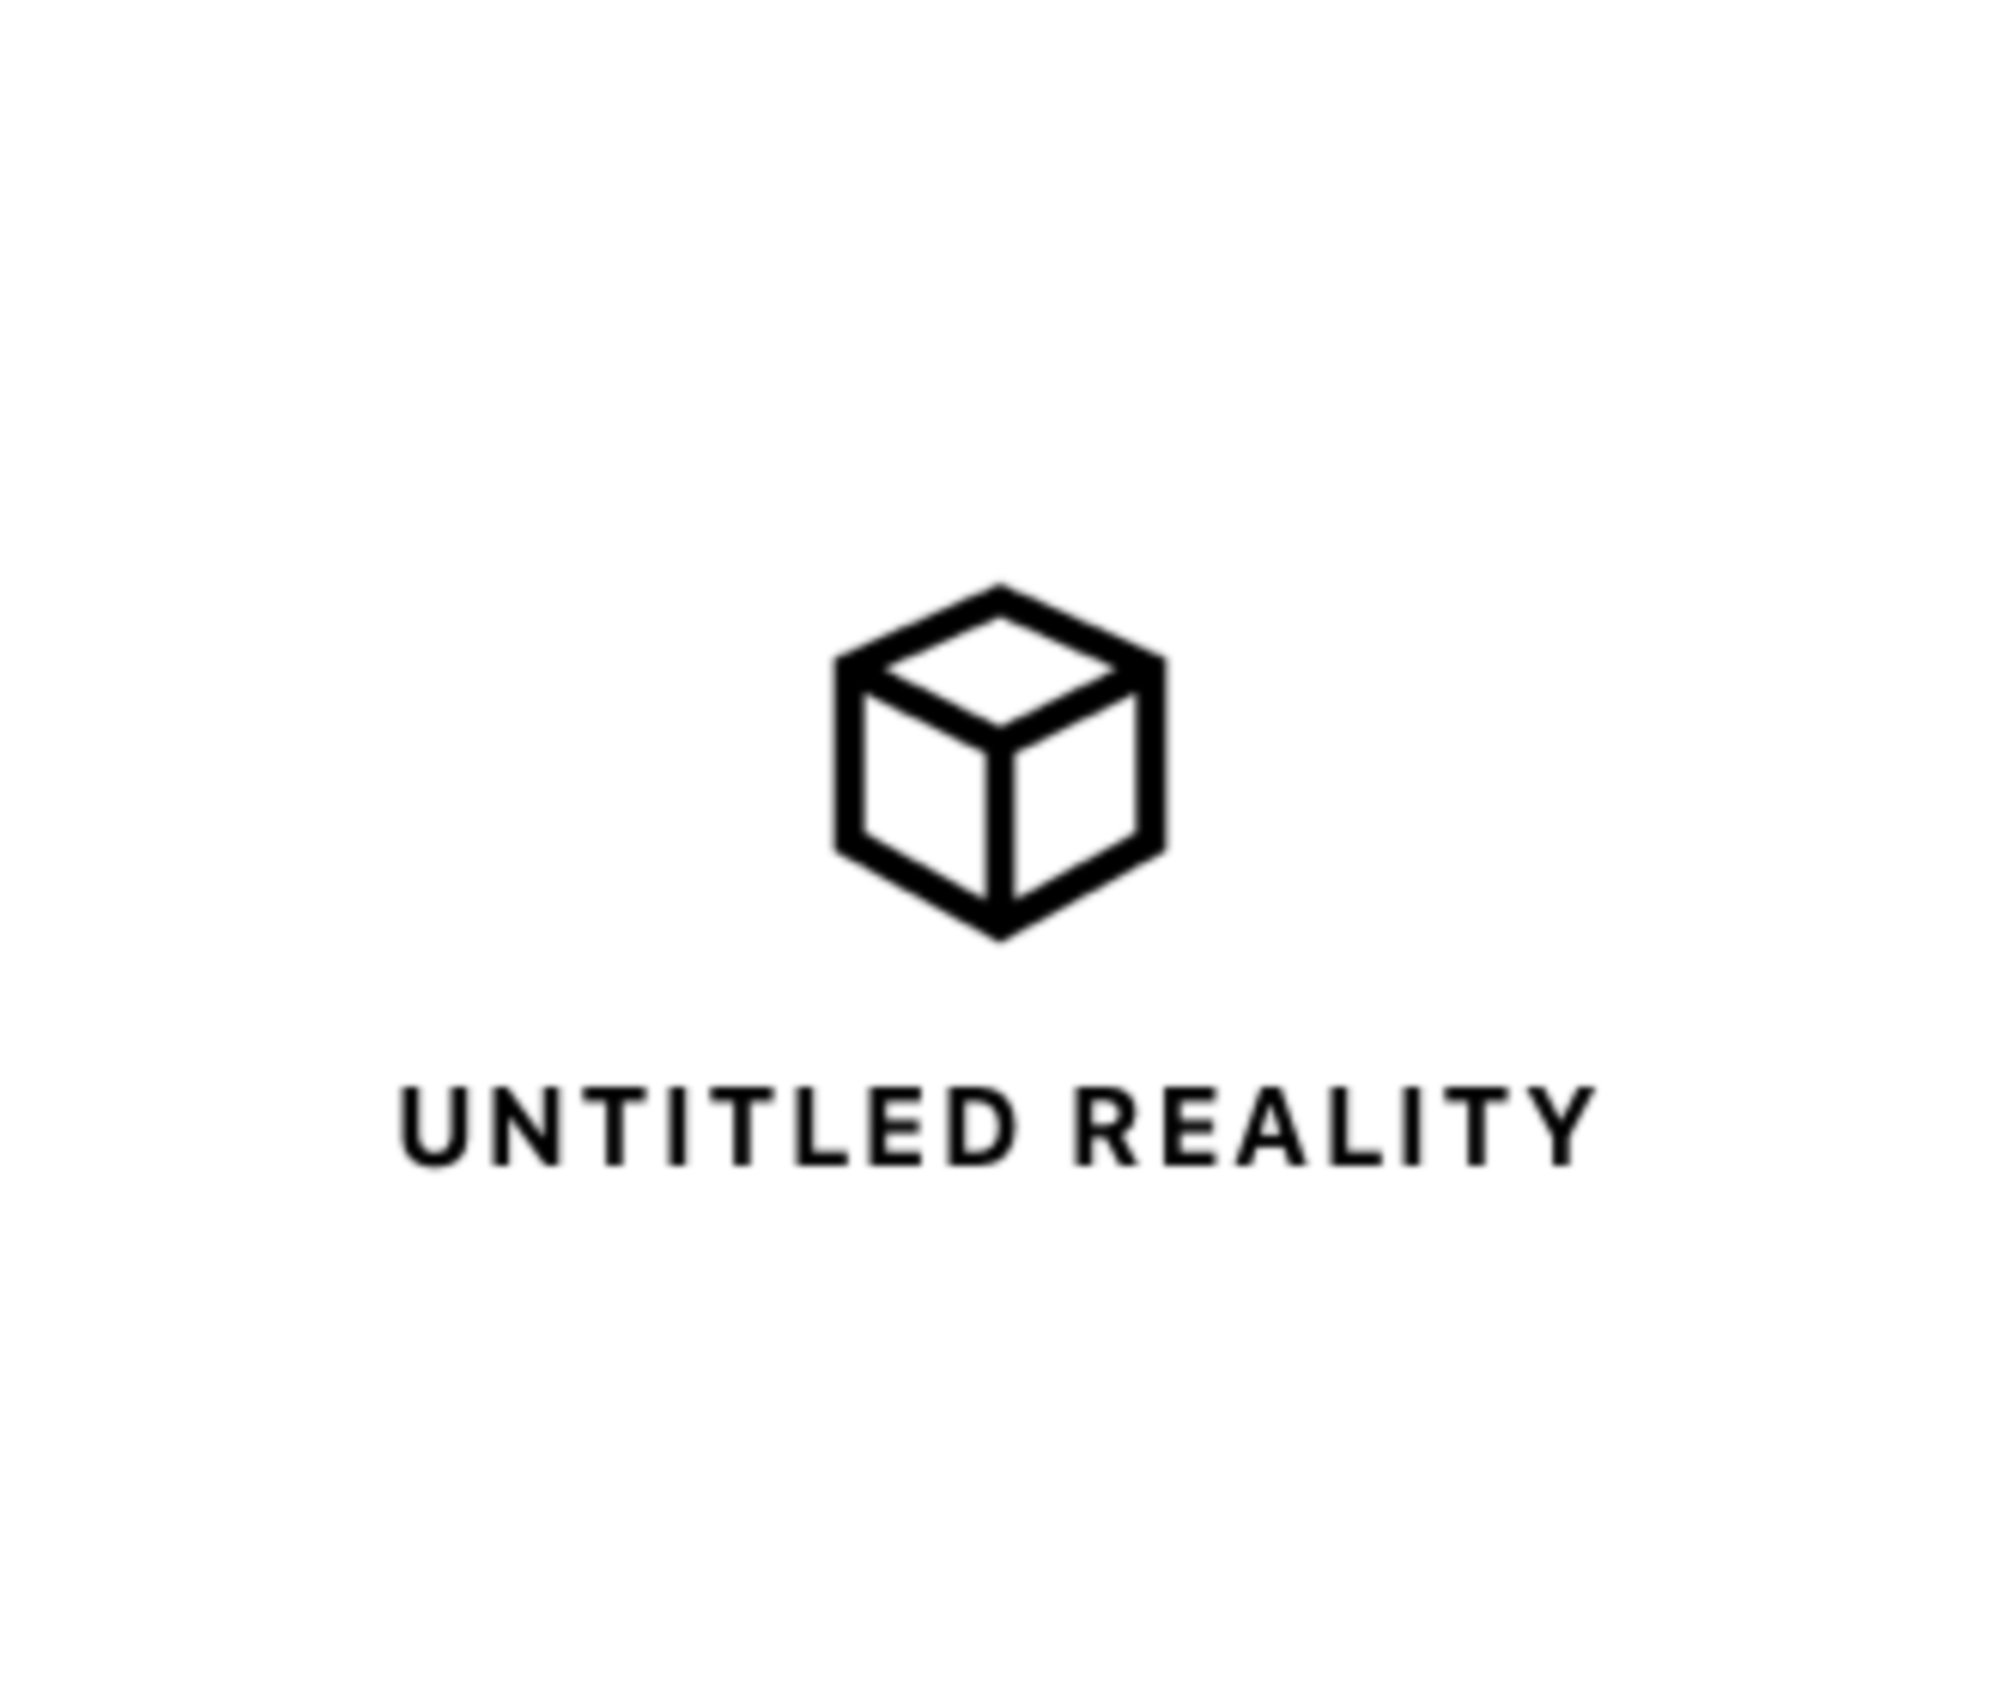 Untitled Reality